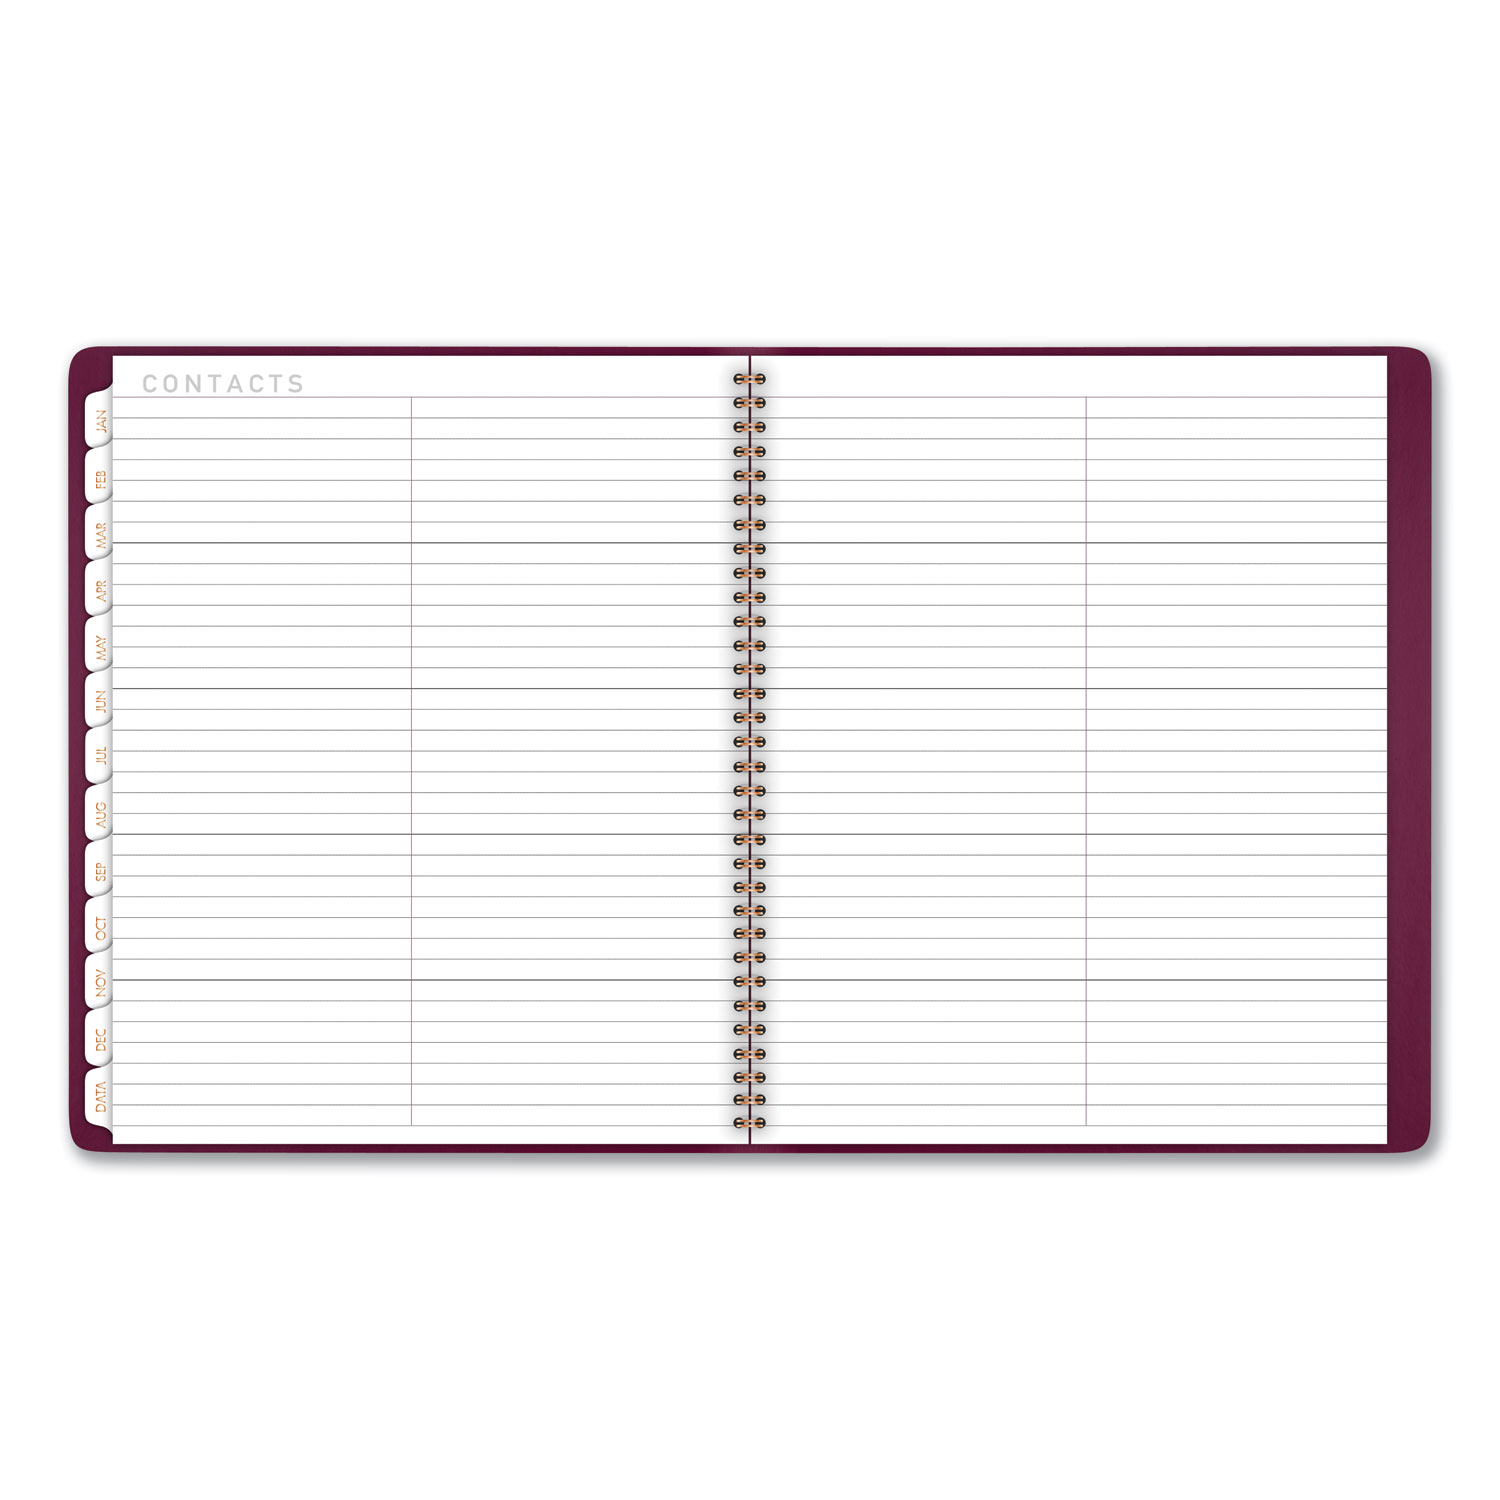 Contemporary Monthly Planner, 11 1/8 x 9 1/2, Purple, 2020